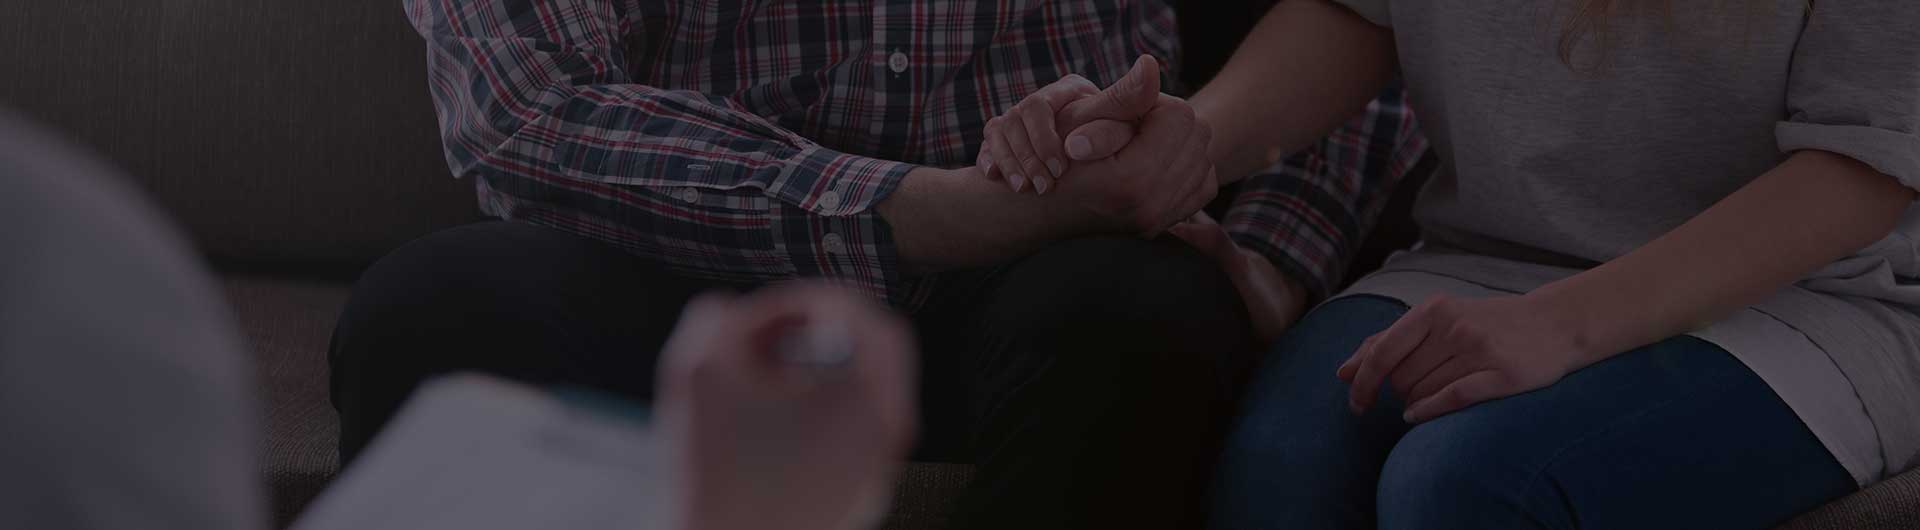 Woman and man holding hands on a couch during a therapy session.